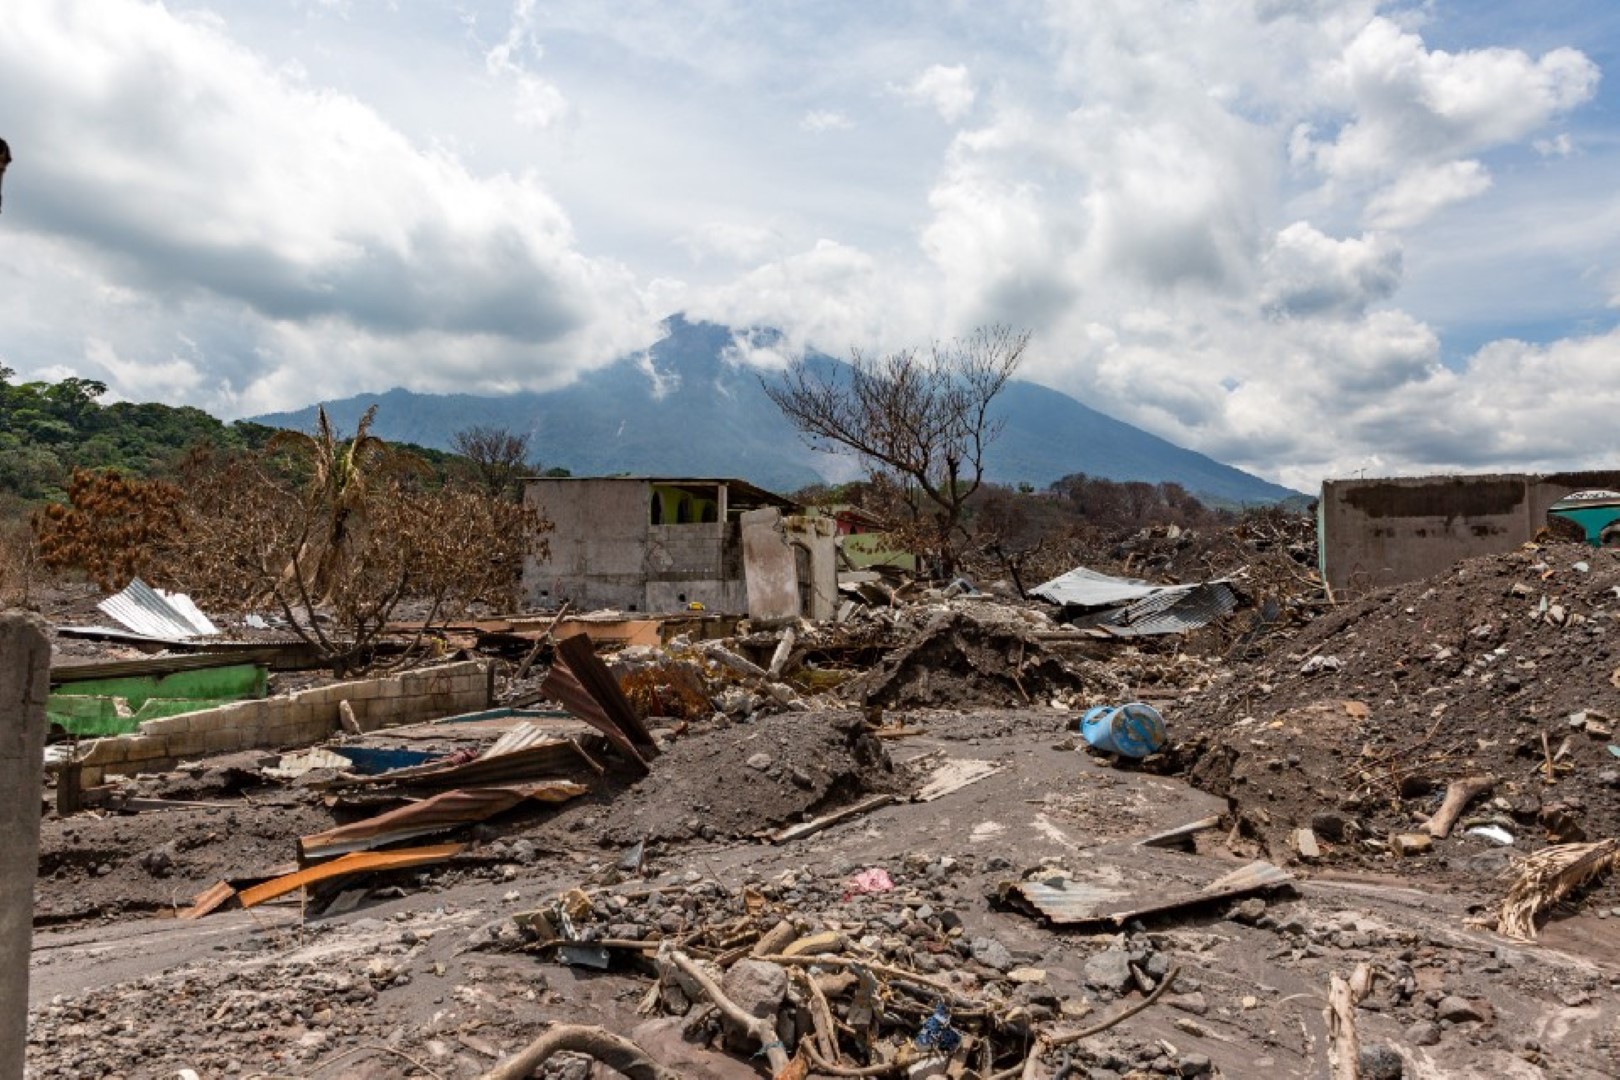 We hate the destructive and deadly pyroclastic flows from volcanoes. The gases and ash from Fuego, in Guatemala, killed more than 100 people and displaced thousands in June 2018. Photo by William Vazquez.